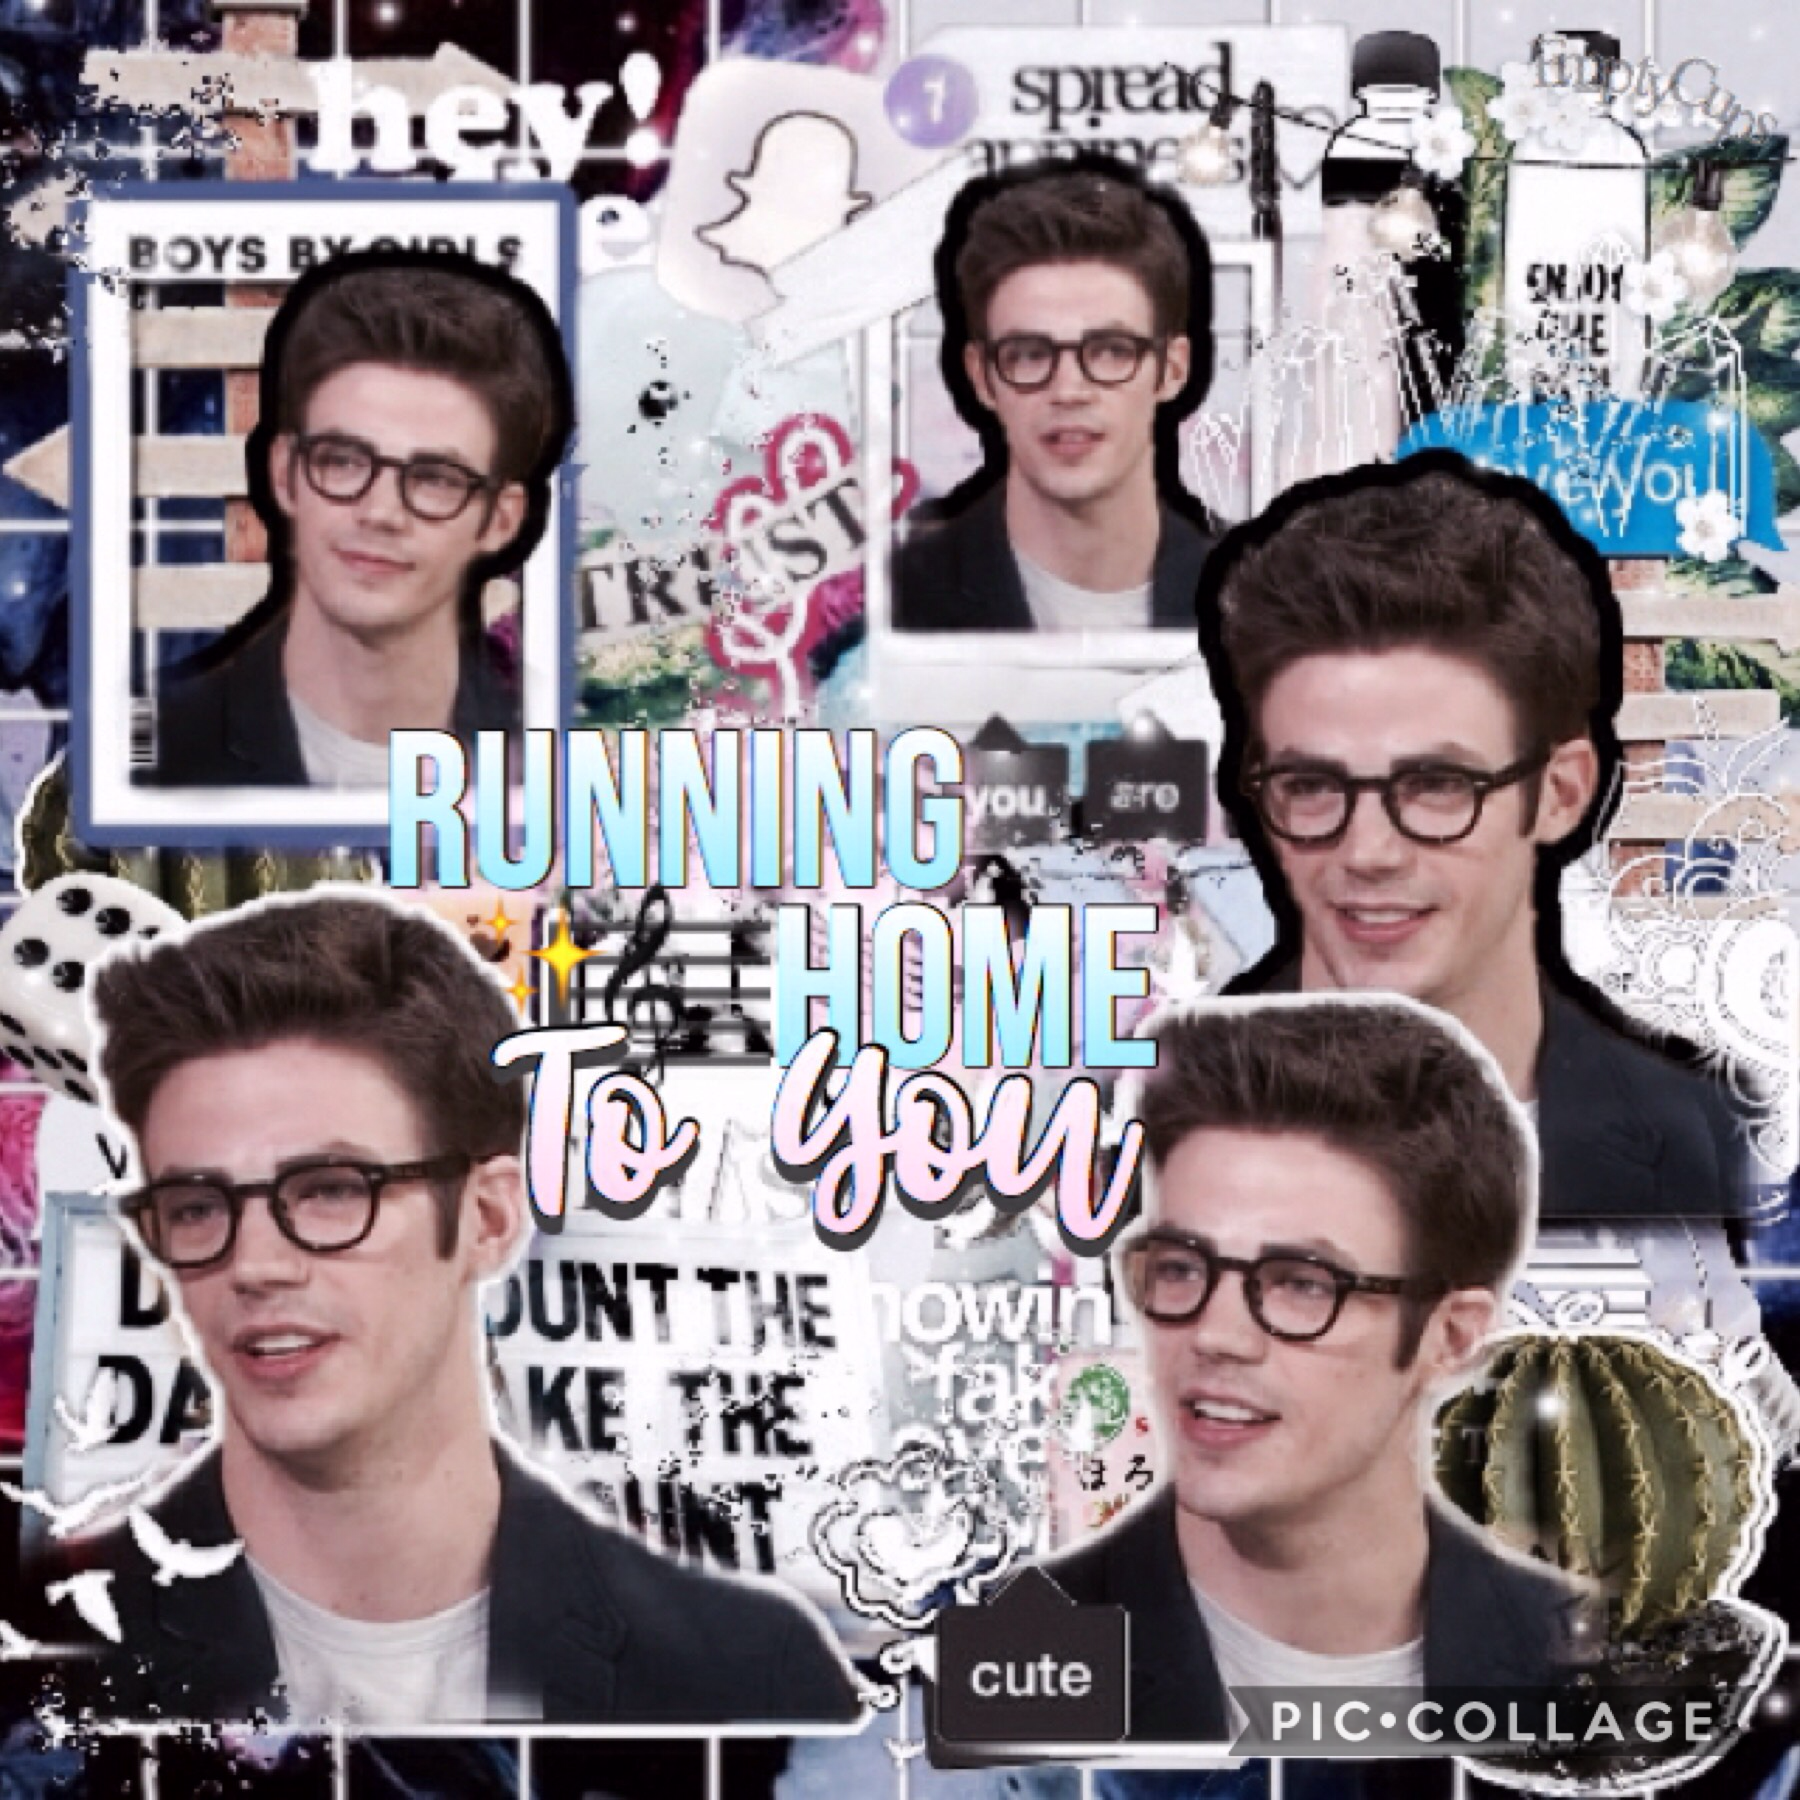 Entry to ThroughItAll's Singer Games Click
Please check comments!
For my best friend~Joy 💞
Song OTC: Running Home To You ✨
Artist: Grant Gustin